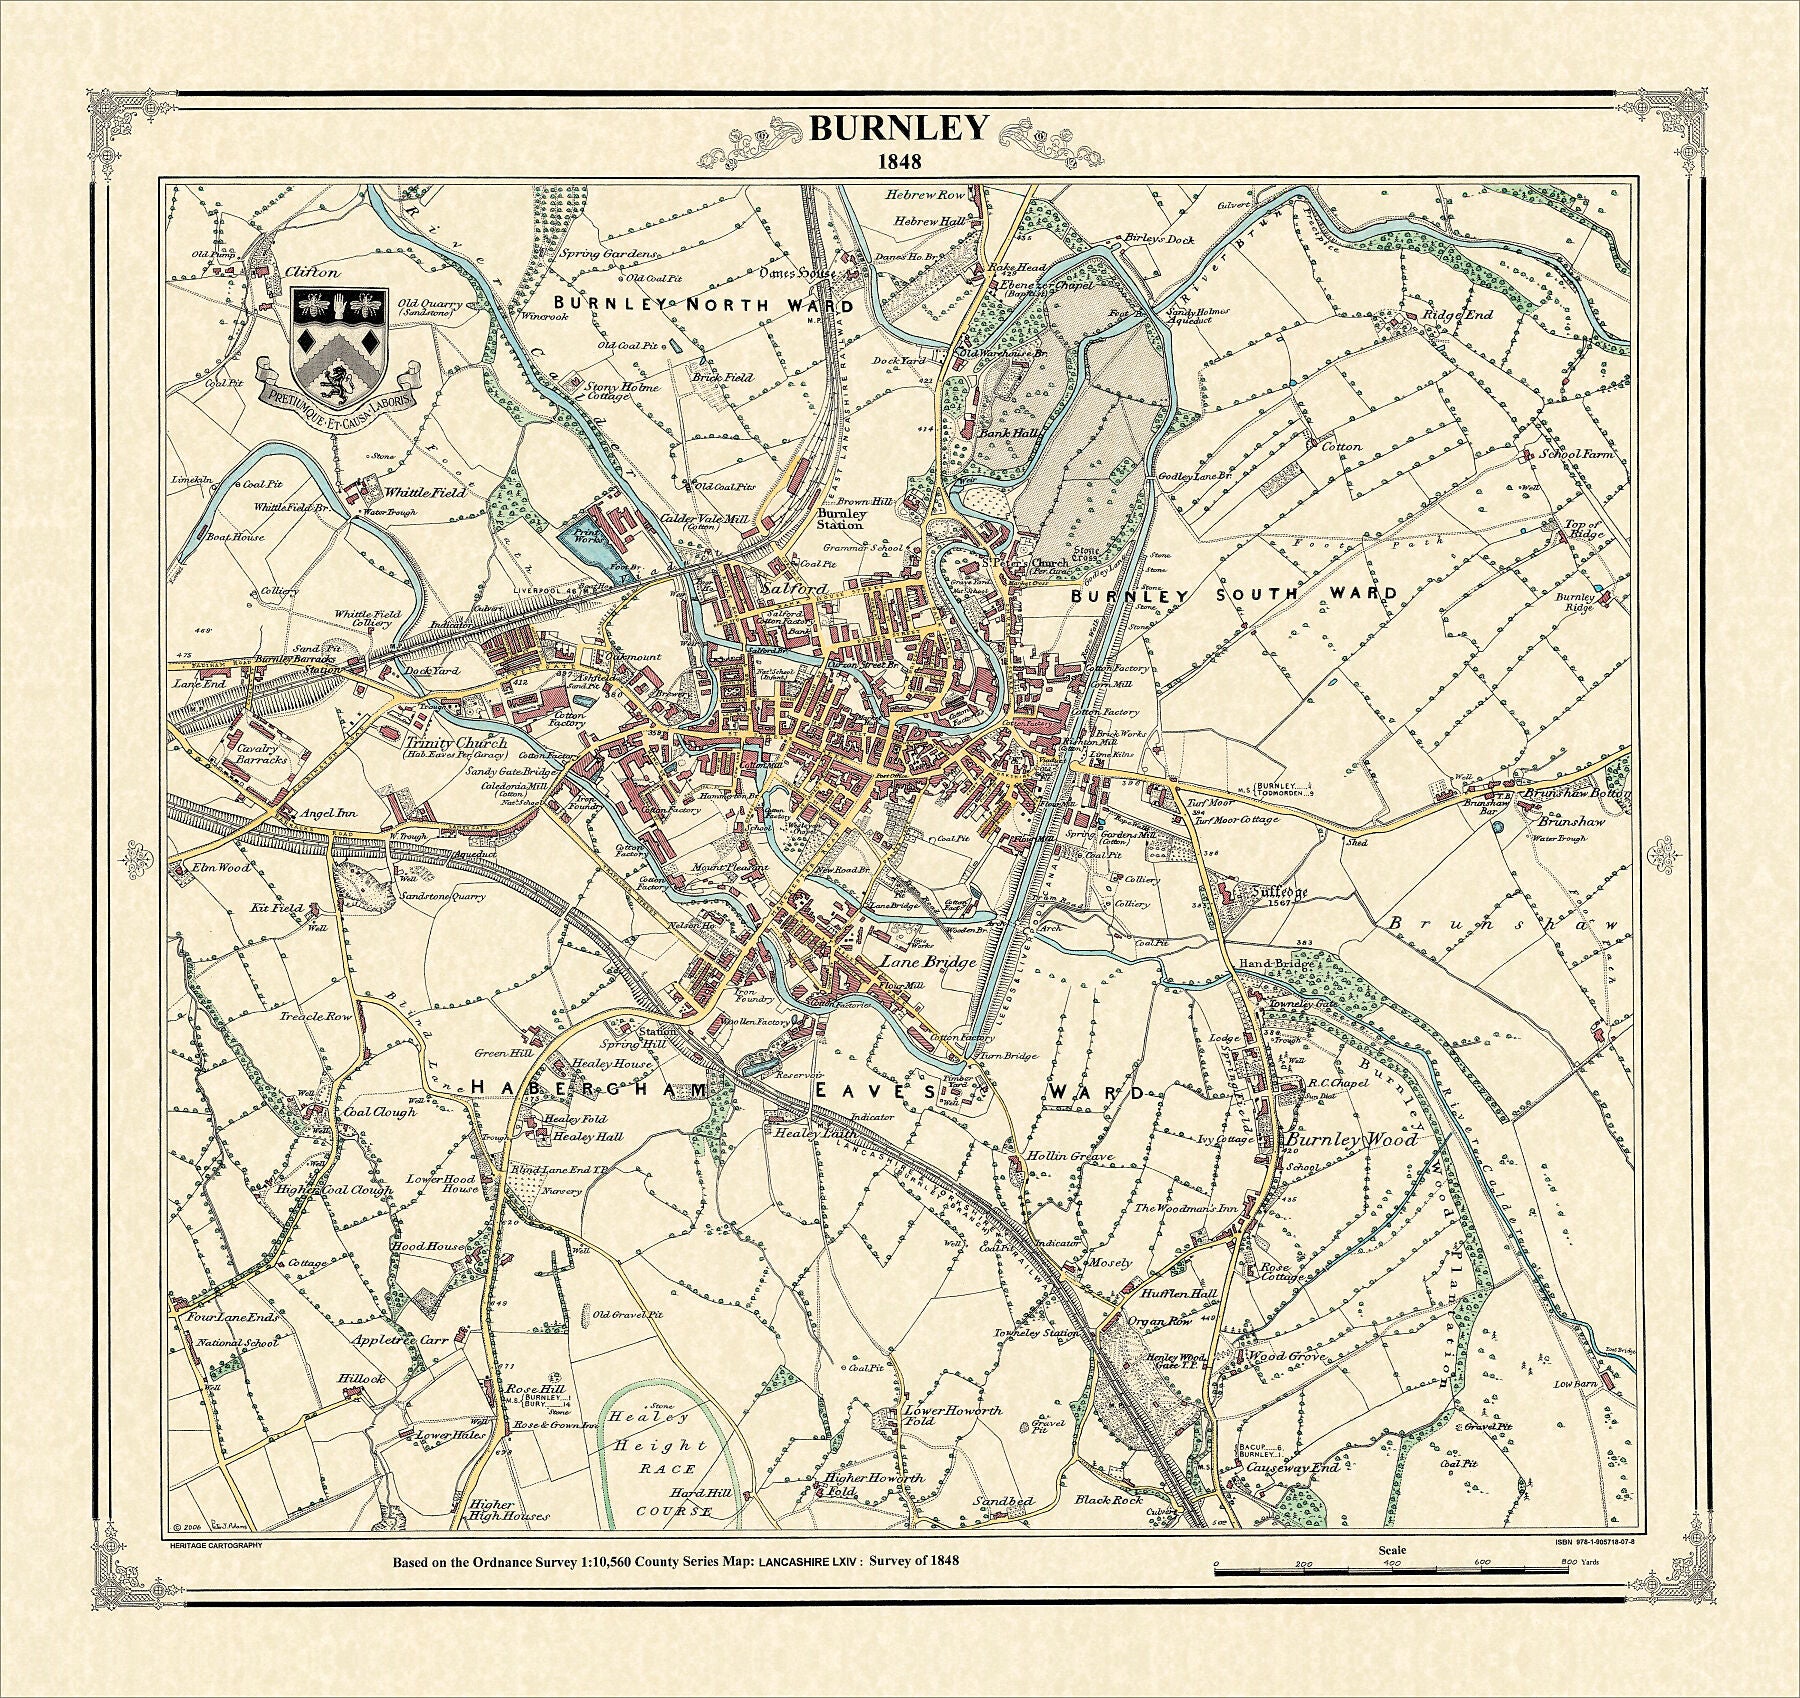 Coloured Victorian map of Burnley in 1848 by Peter J Adams of Heritage Cartography